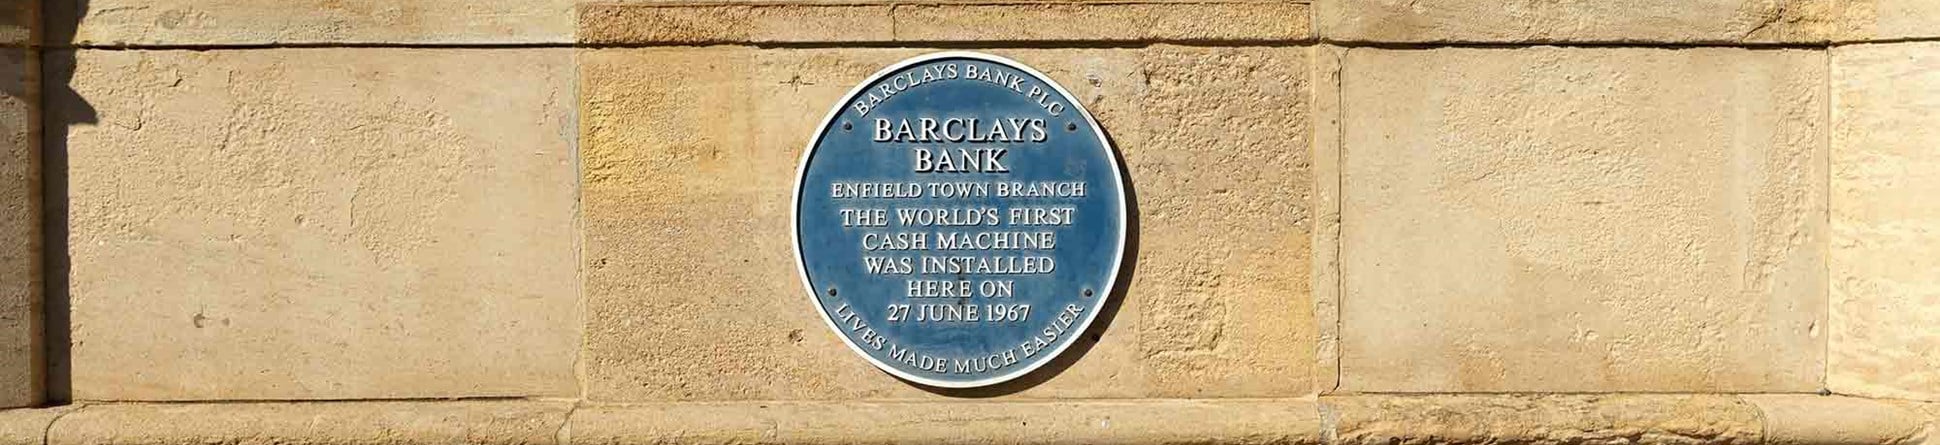 Blue plaque mounted on a stone wall. It reads Barclays Bank, Enfield Town Branch, the world's first cash machine was installed here on 27 June 1967. Lives made much easier.